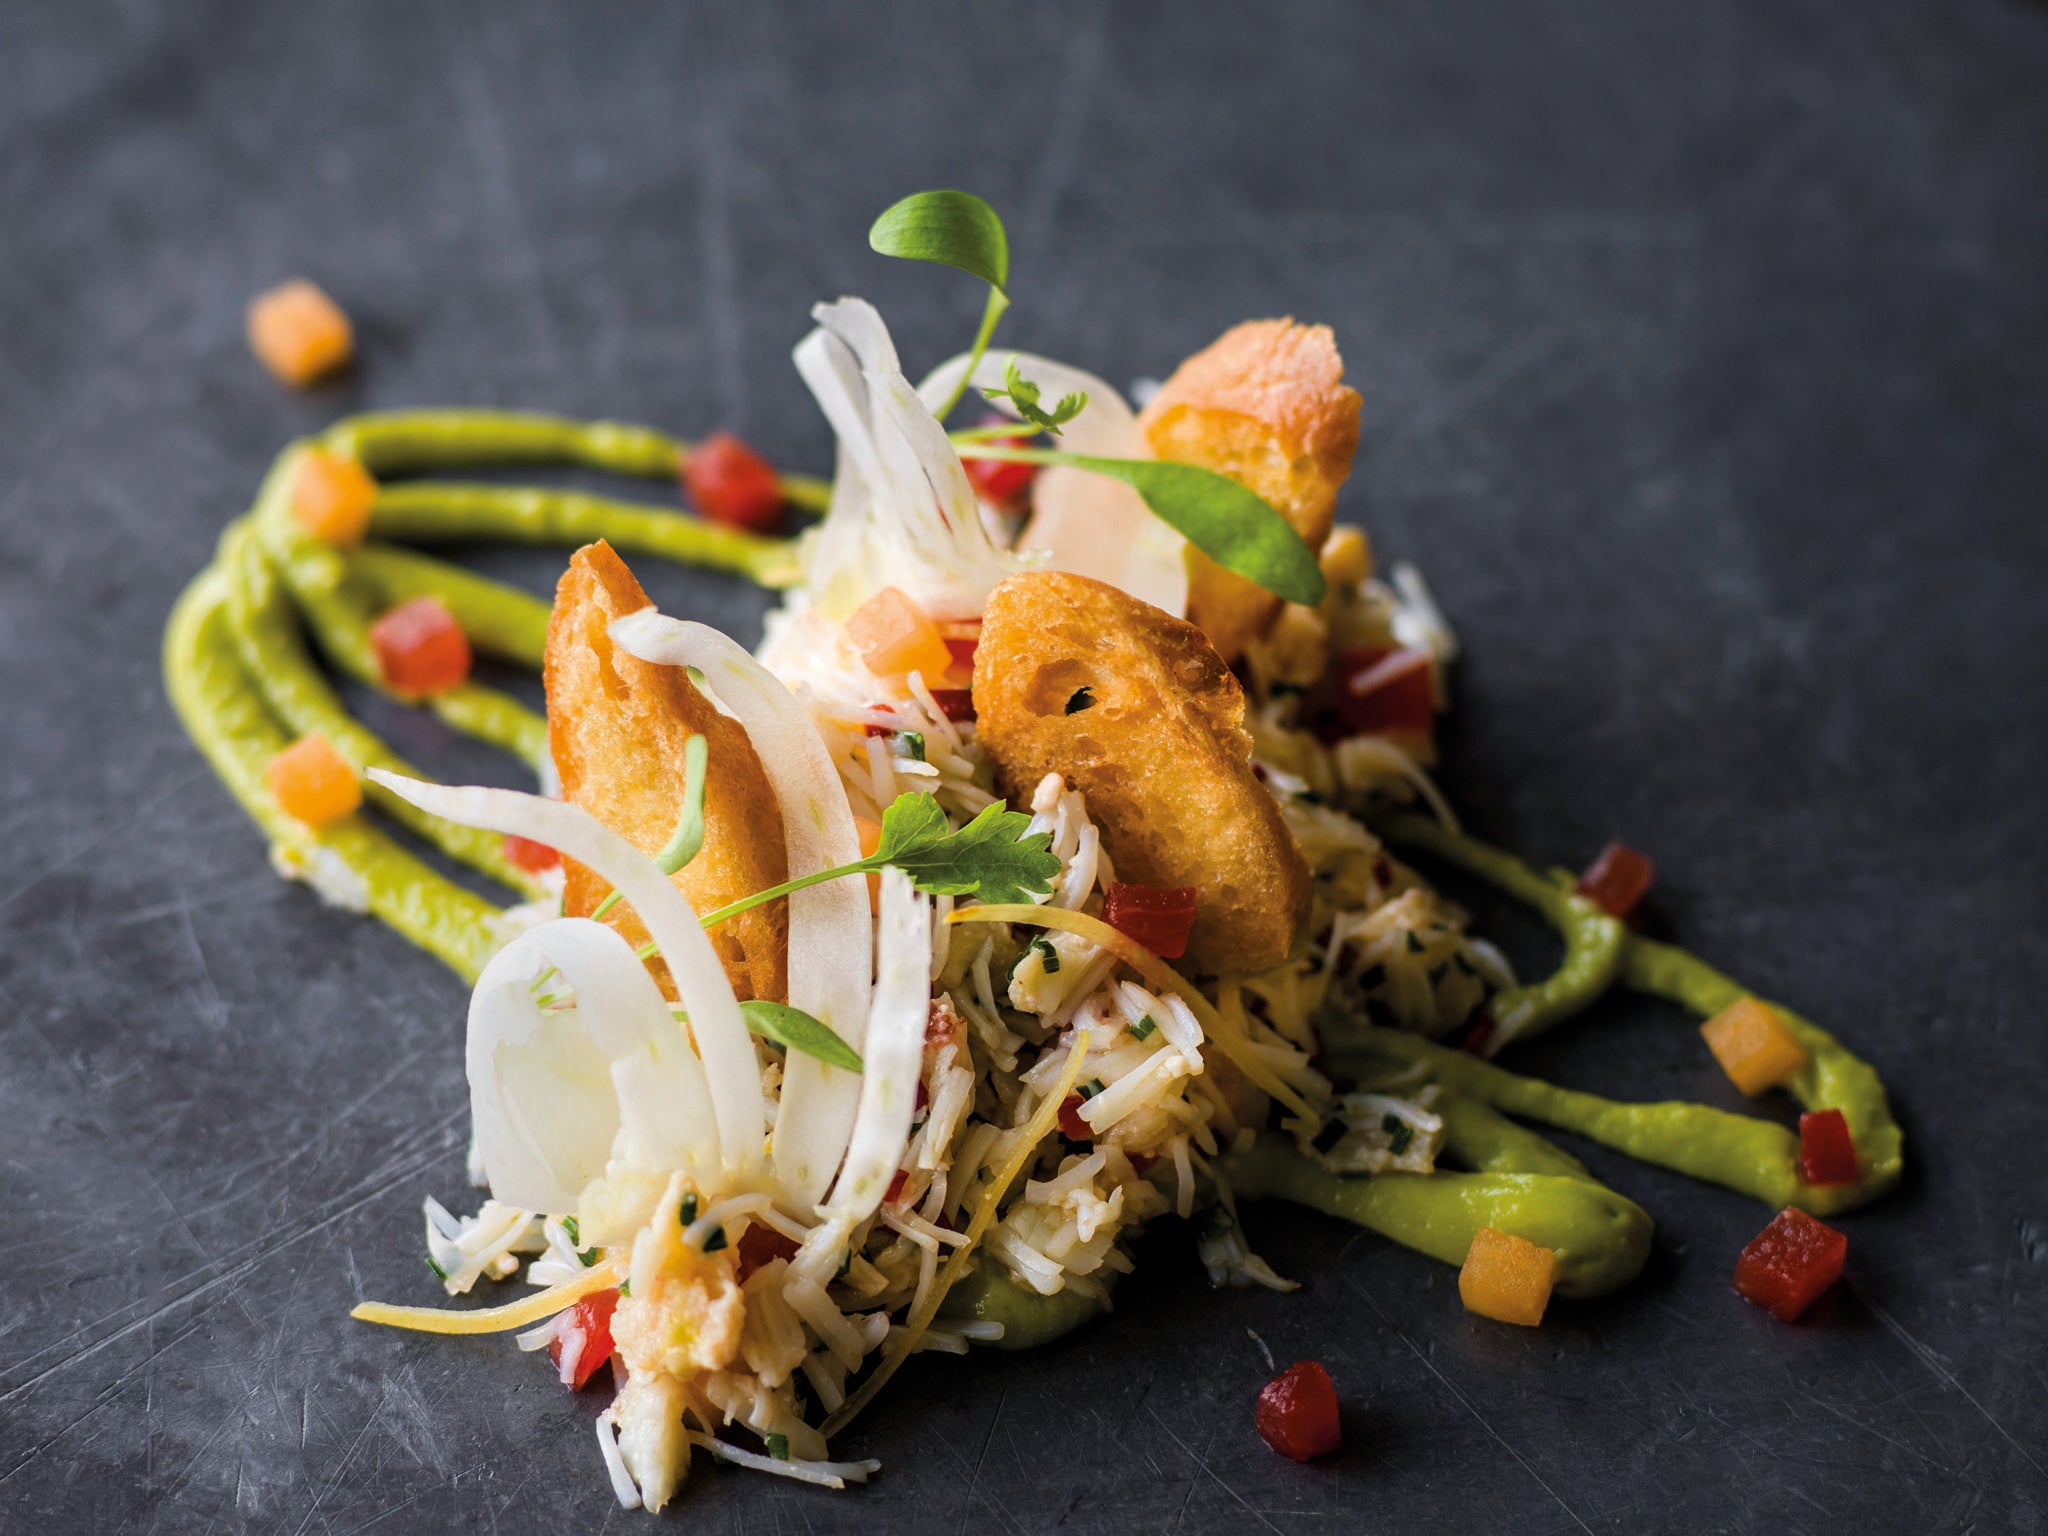 Dressed crab: with Tobasco, avocado, fennel and melon this dish is as summery as it comes